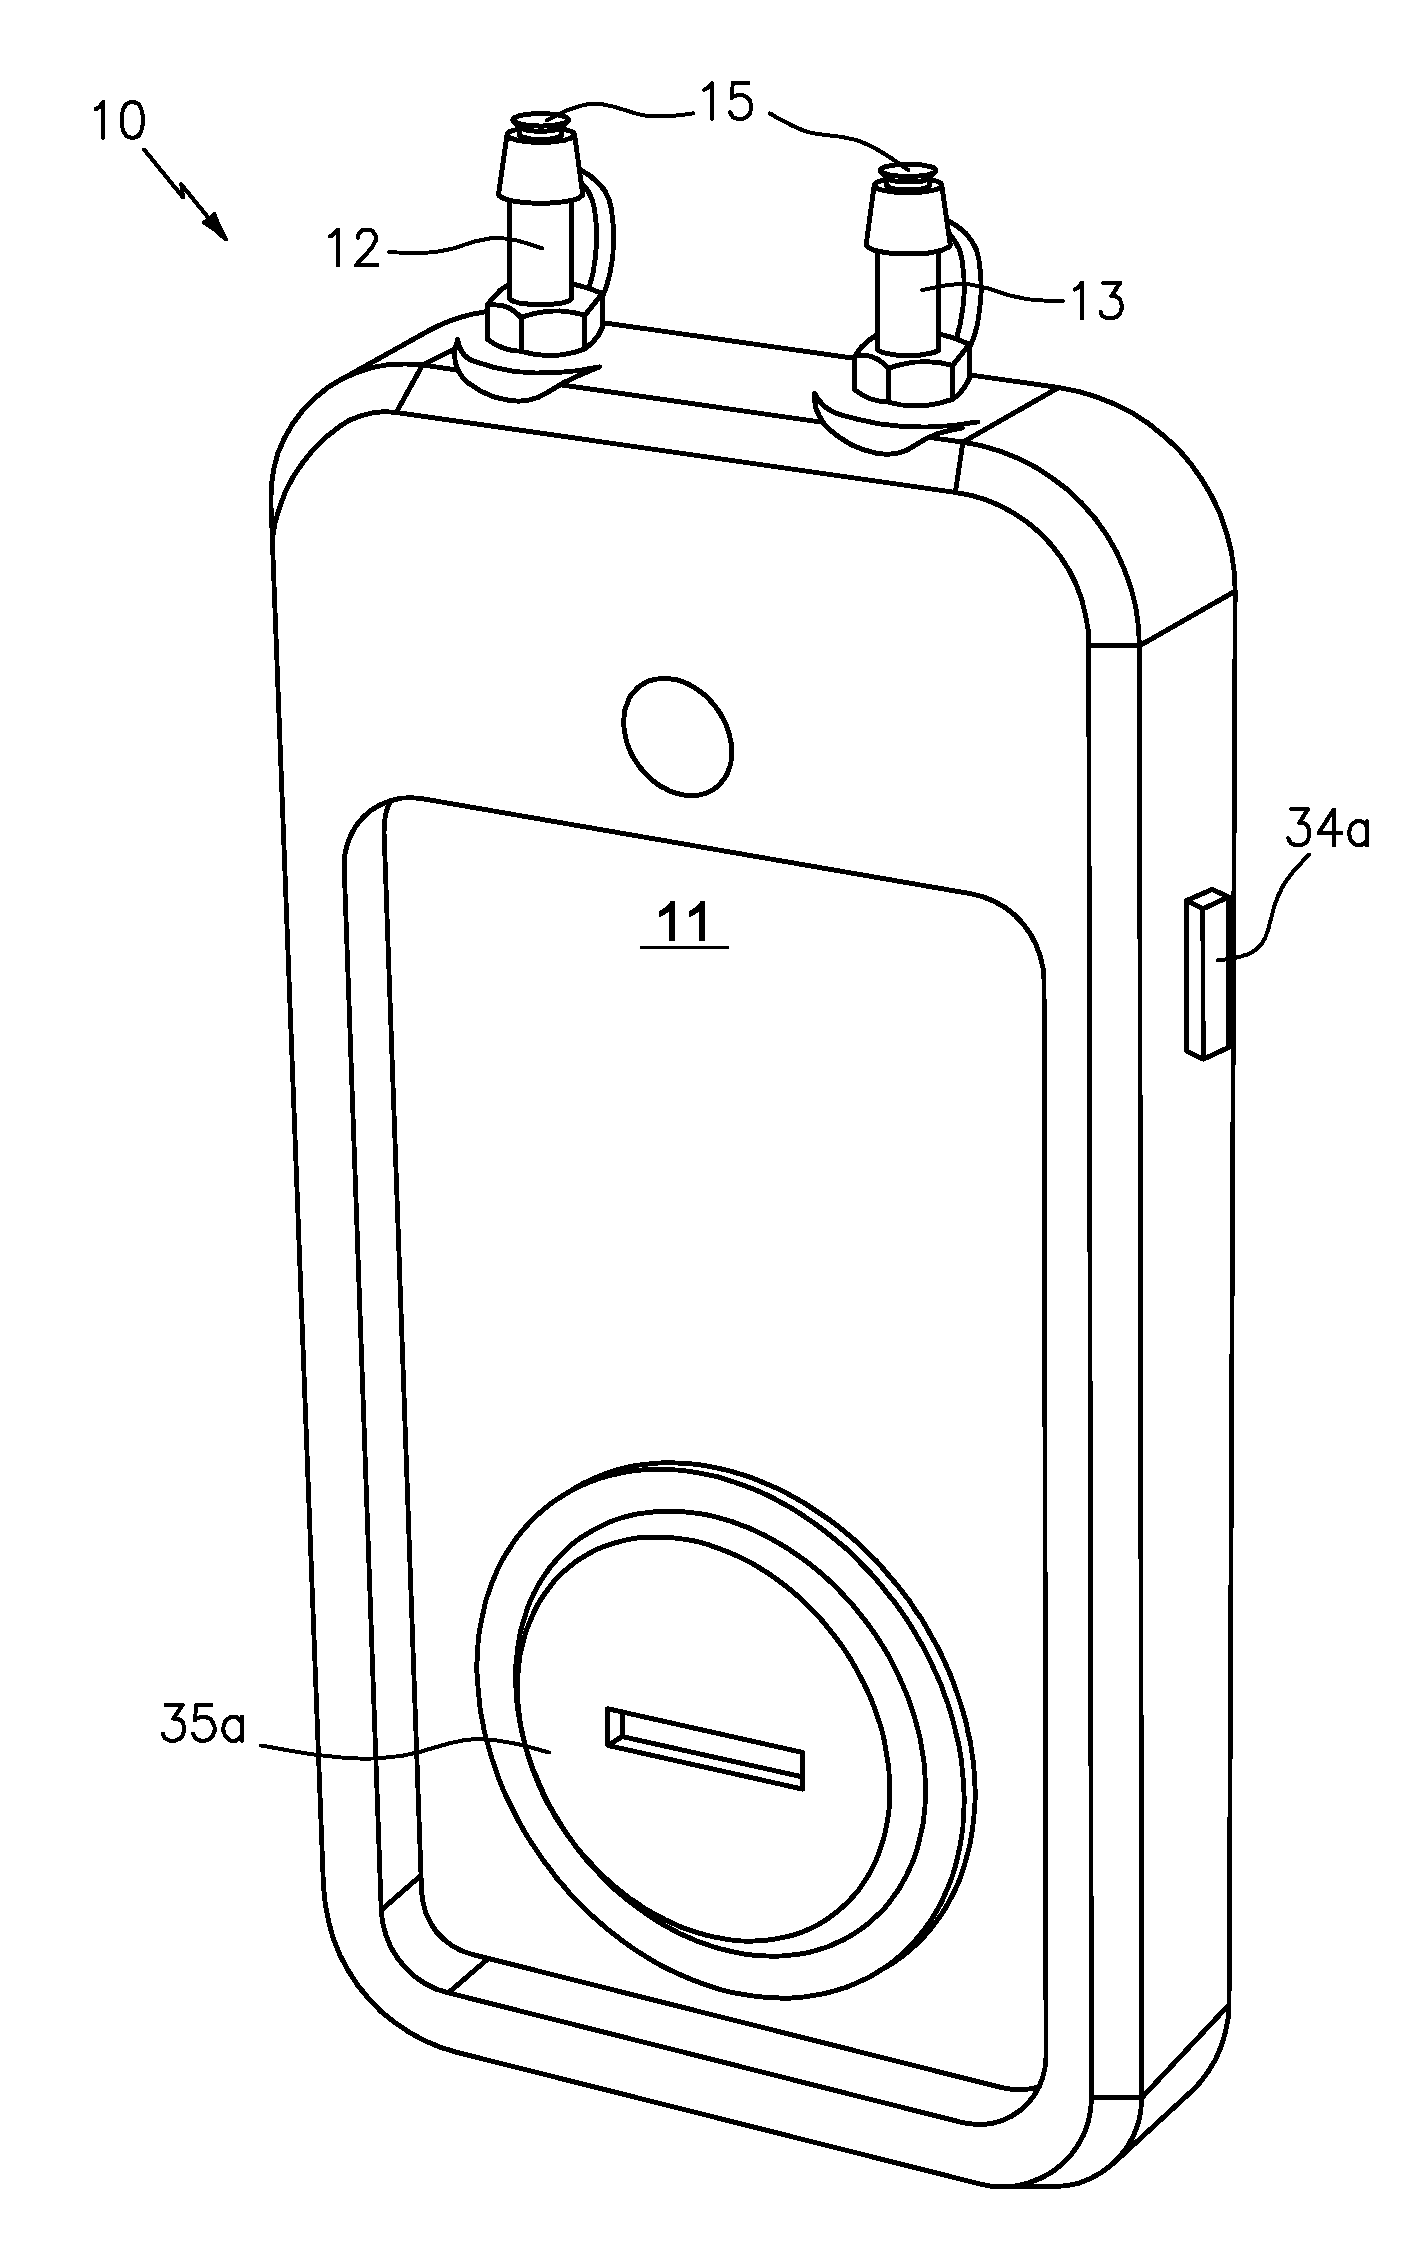 Smartphone operated air pressure meter and system